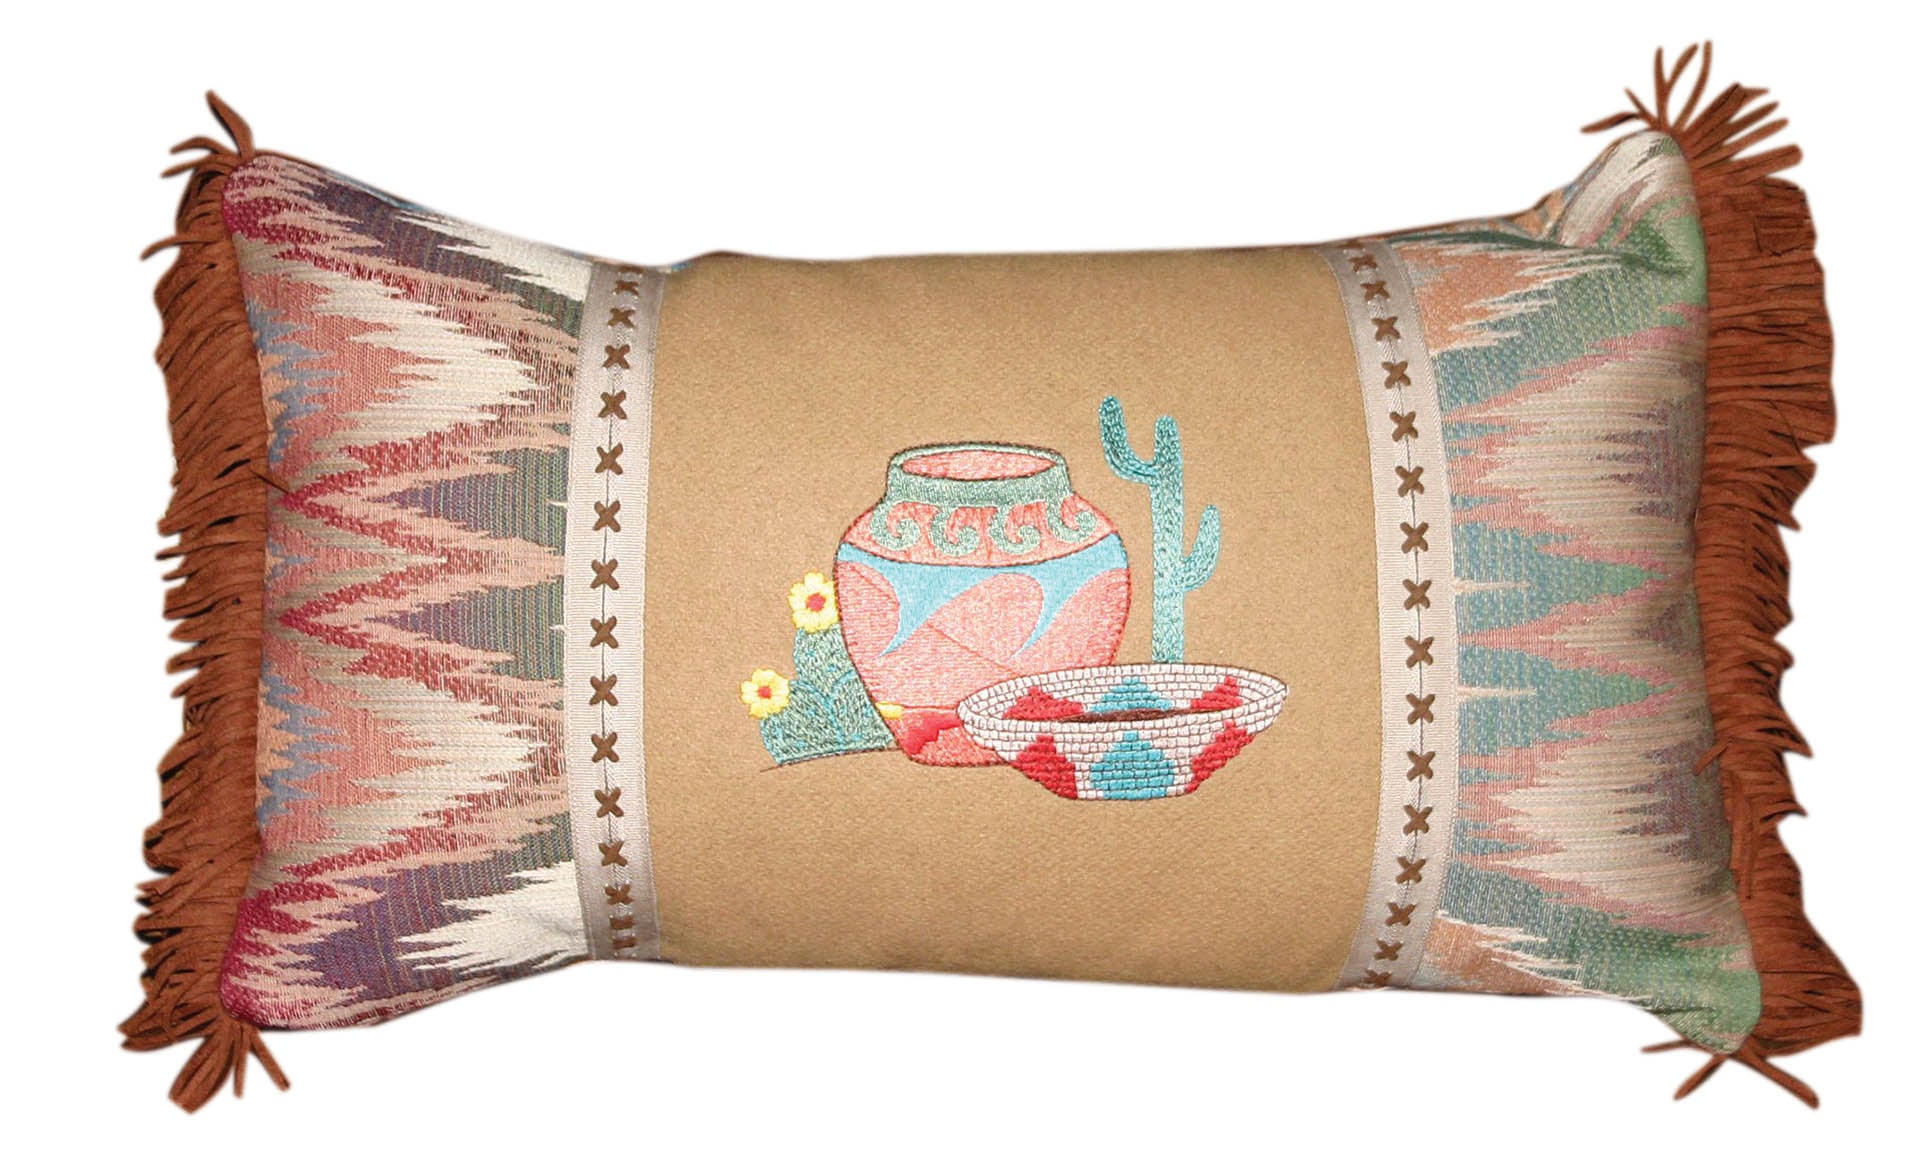 Embroidered Horse Western Pillow- Southwestern Decor